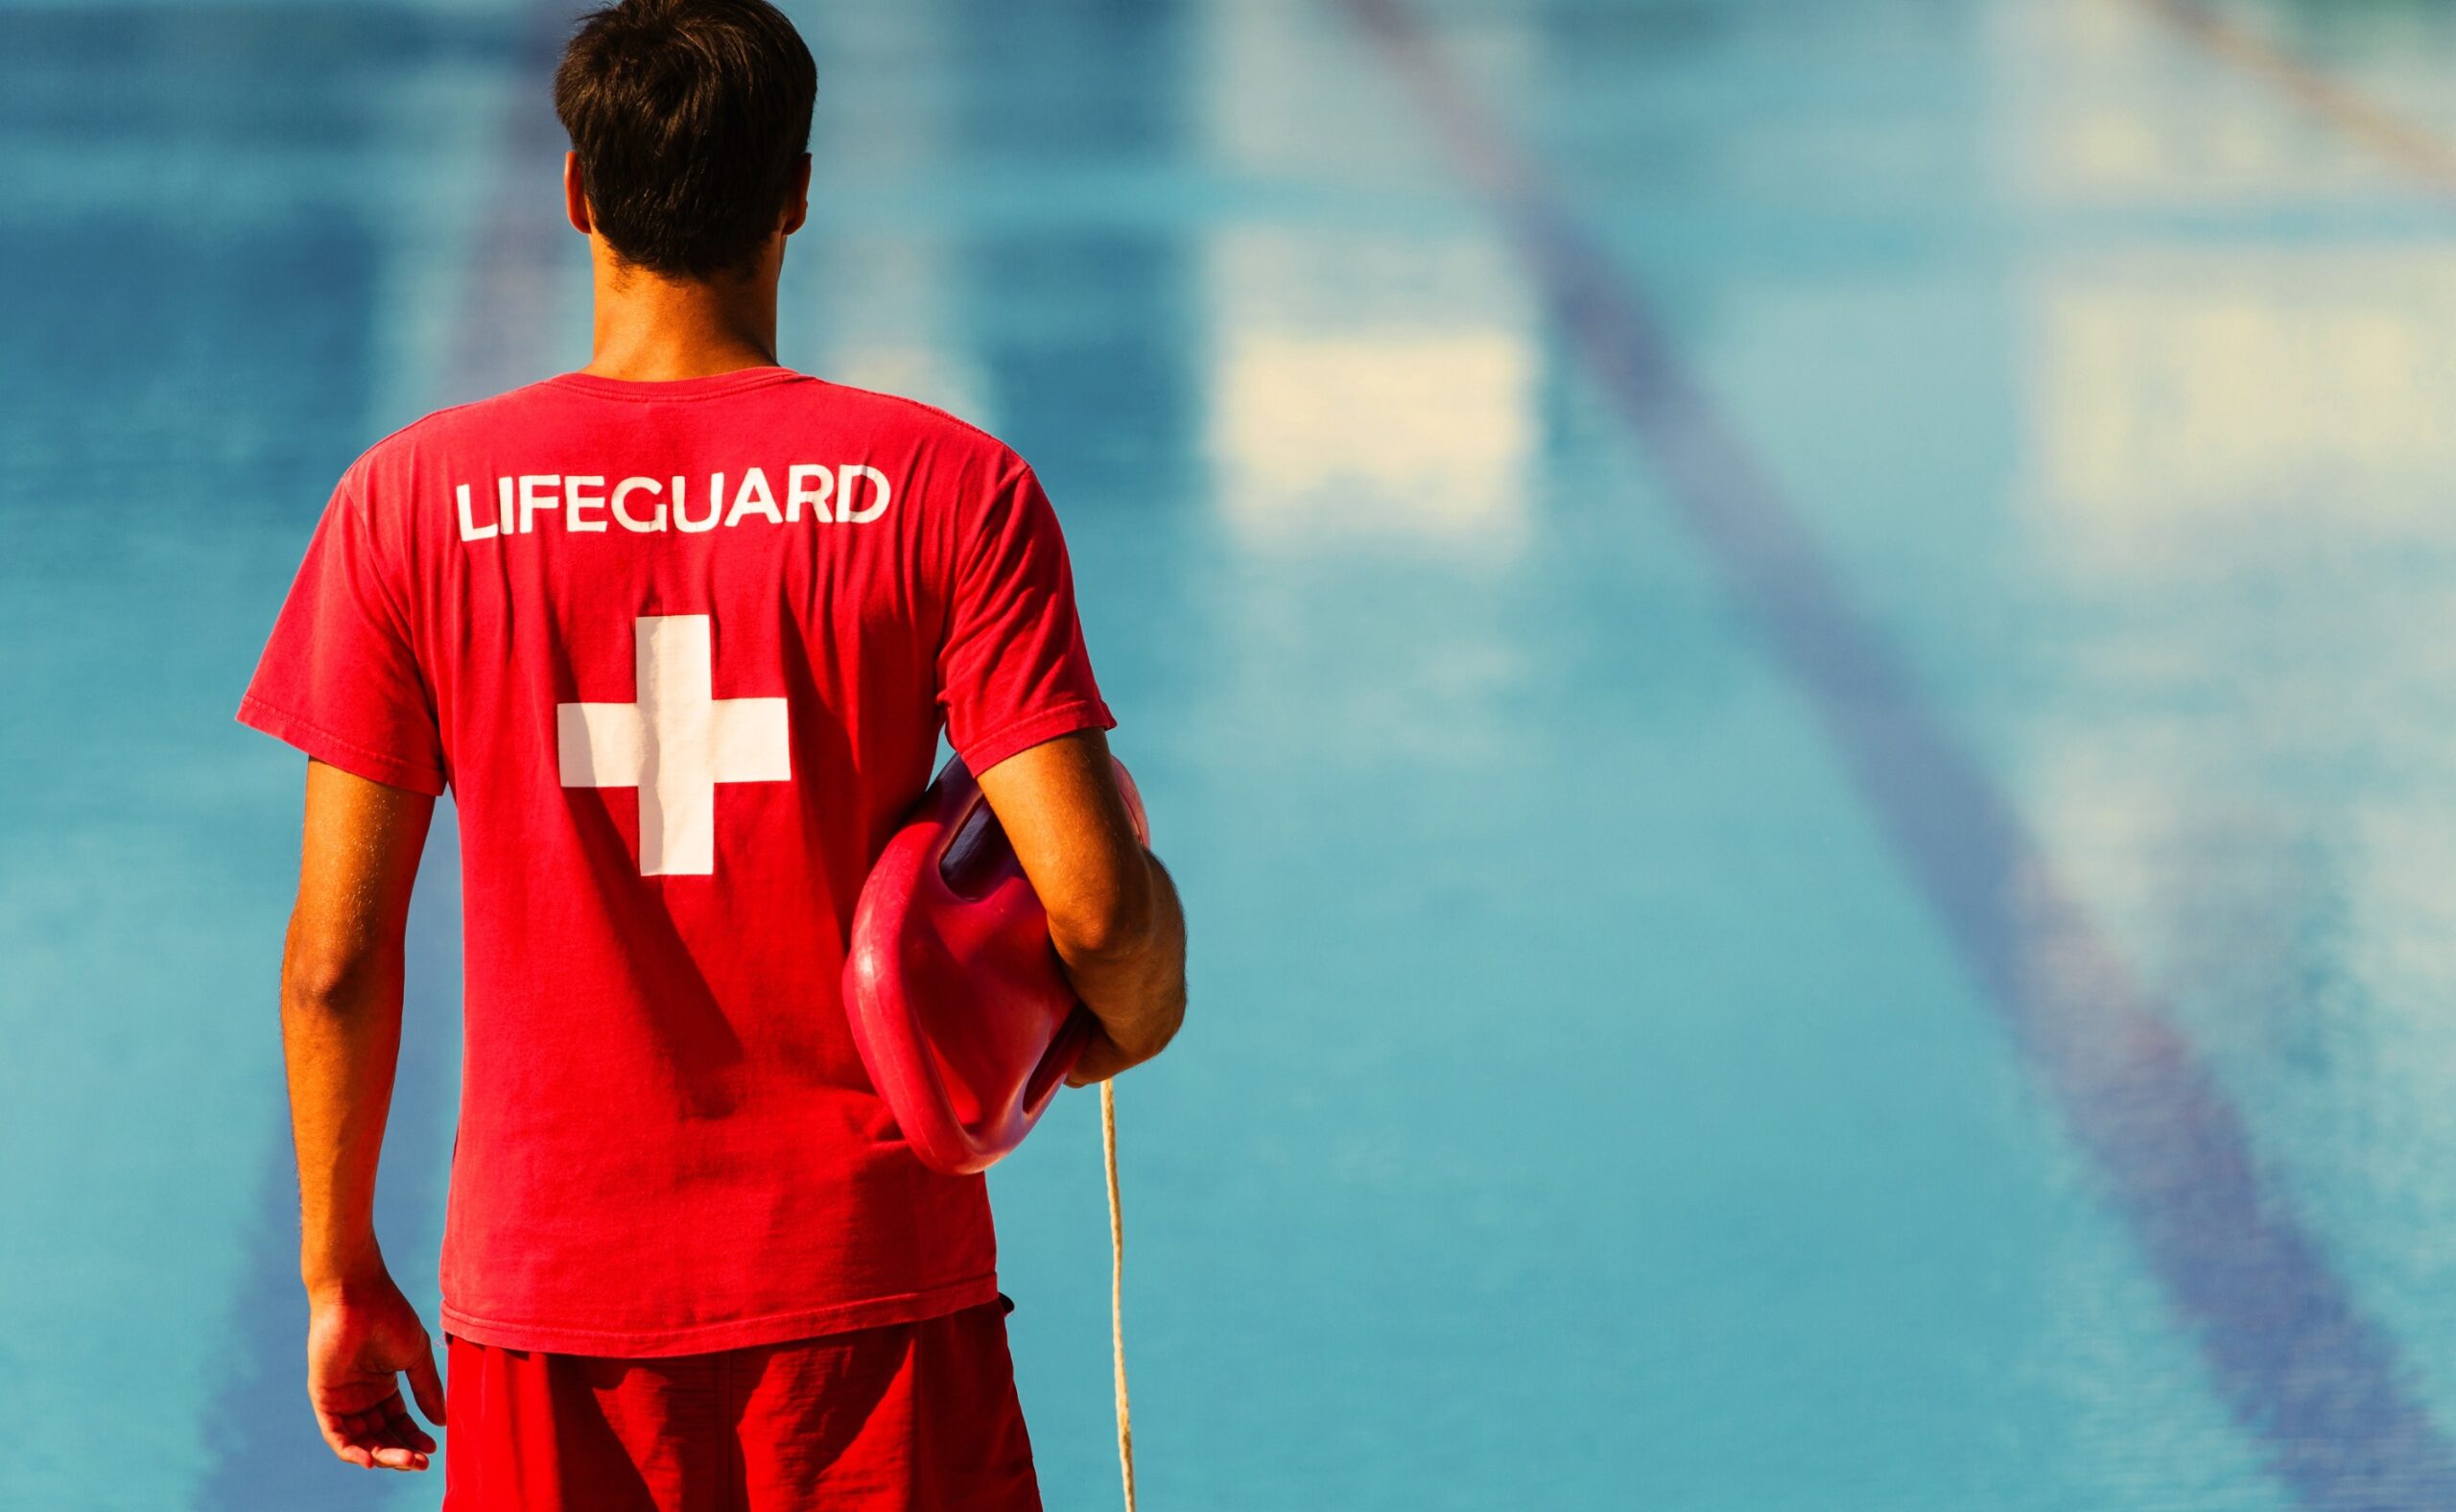 18-facts-about-lifeguards